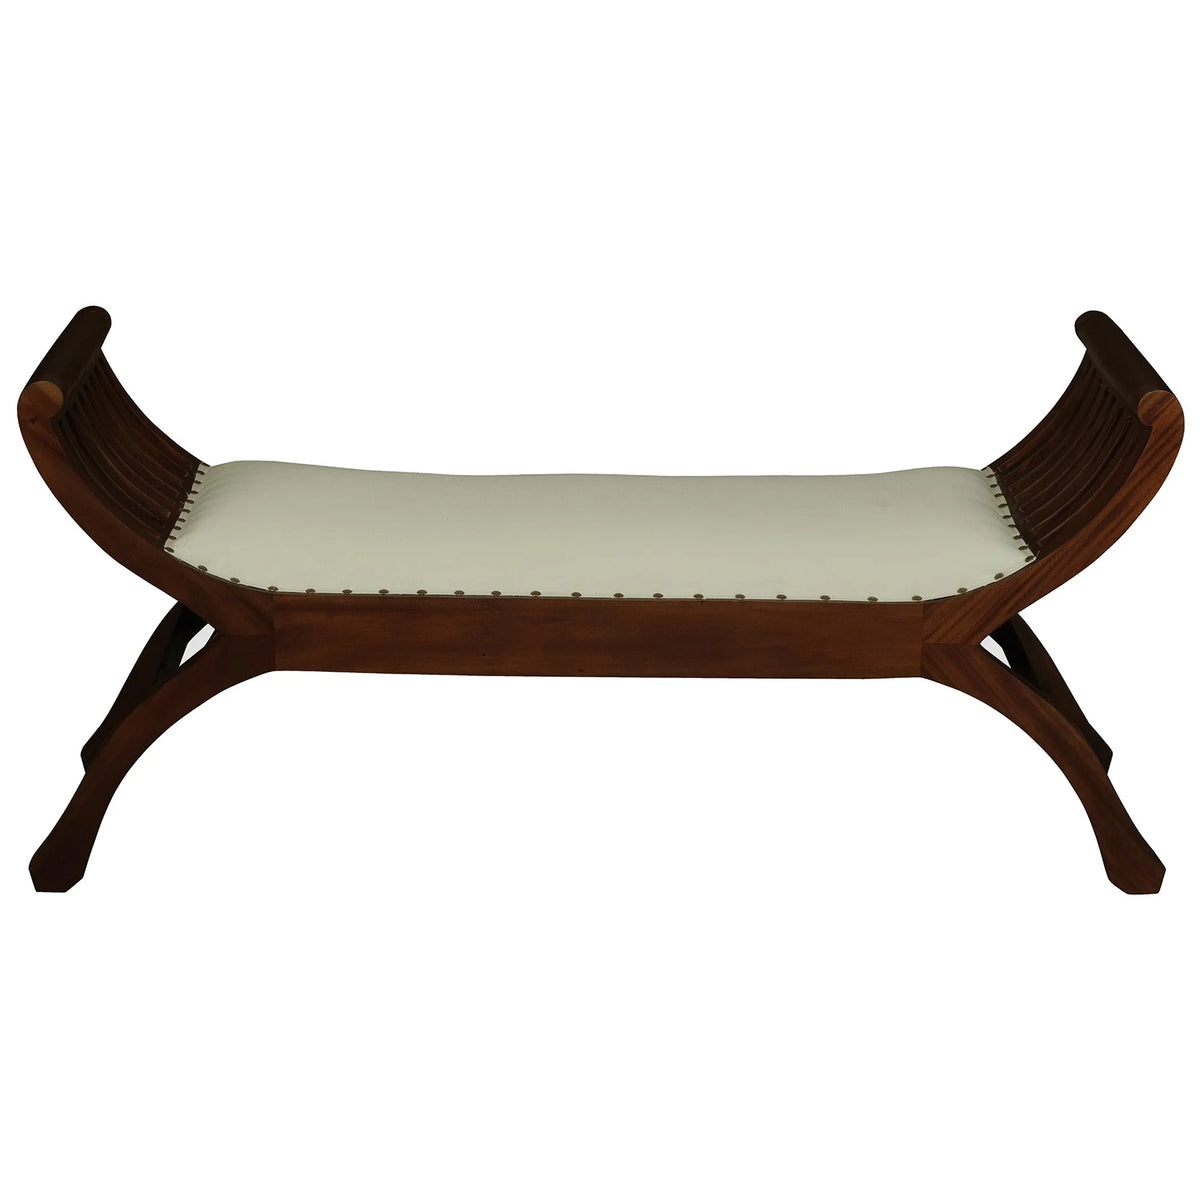 Upholstered Mahogany Timber Curved Bench with Cushioned Seat - Mahogany - Notbrand